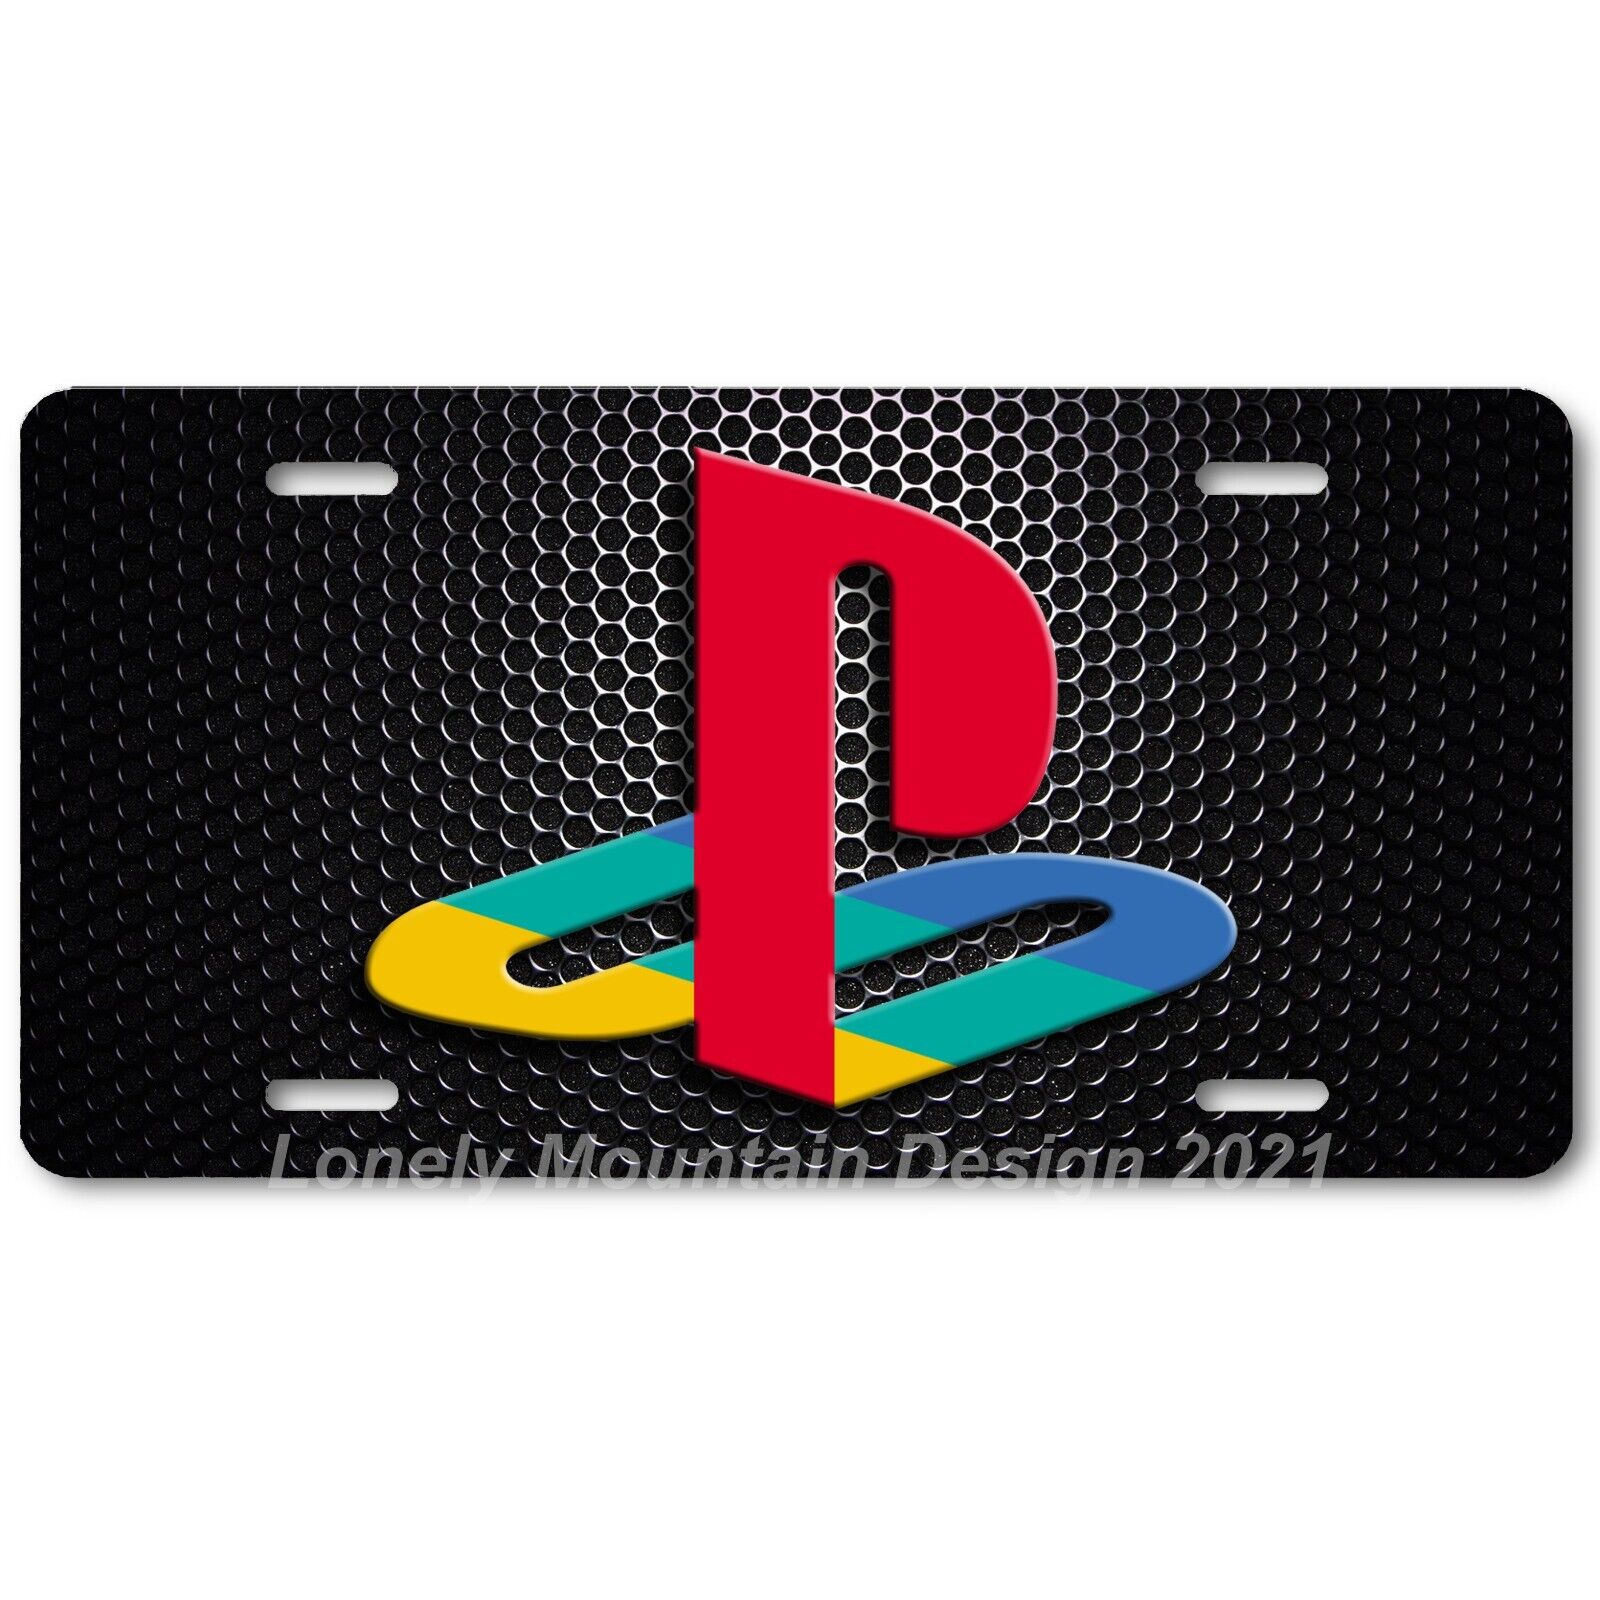 Sony Playstation Inspired Art on Mesh FLAT Aluminum Novelty License Tag Plate